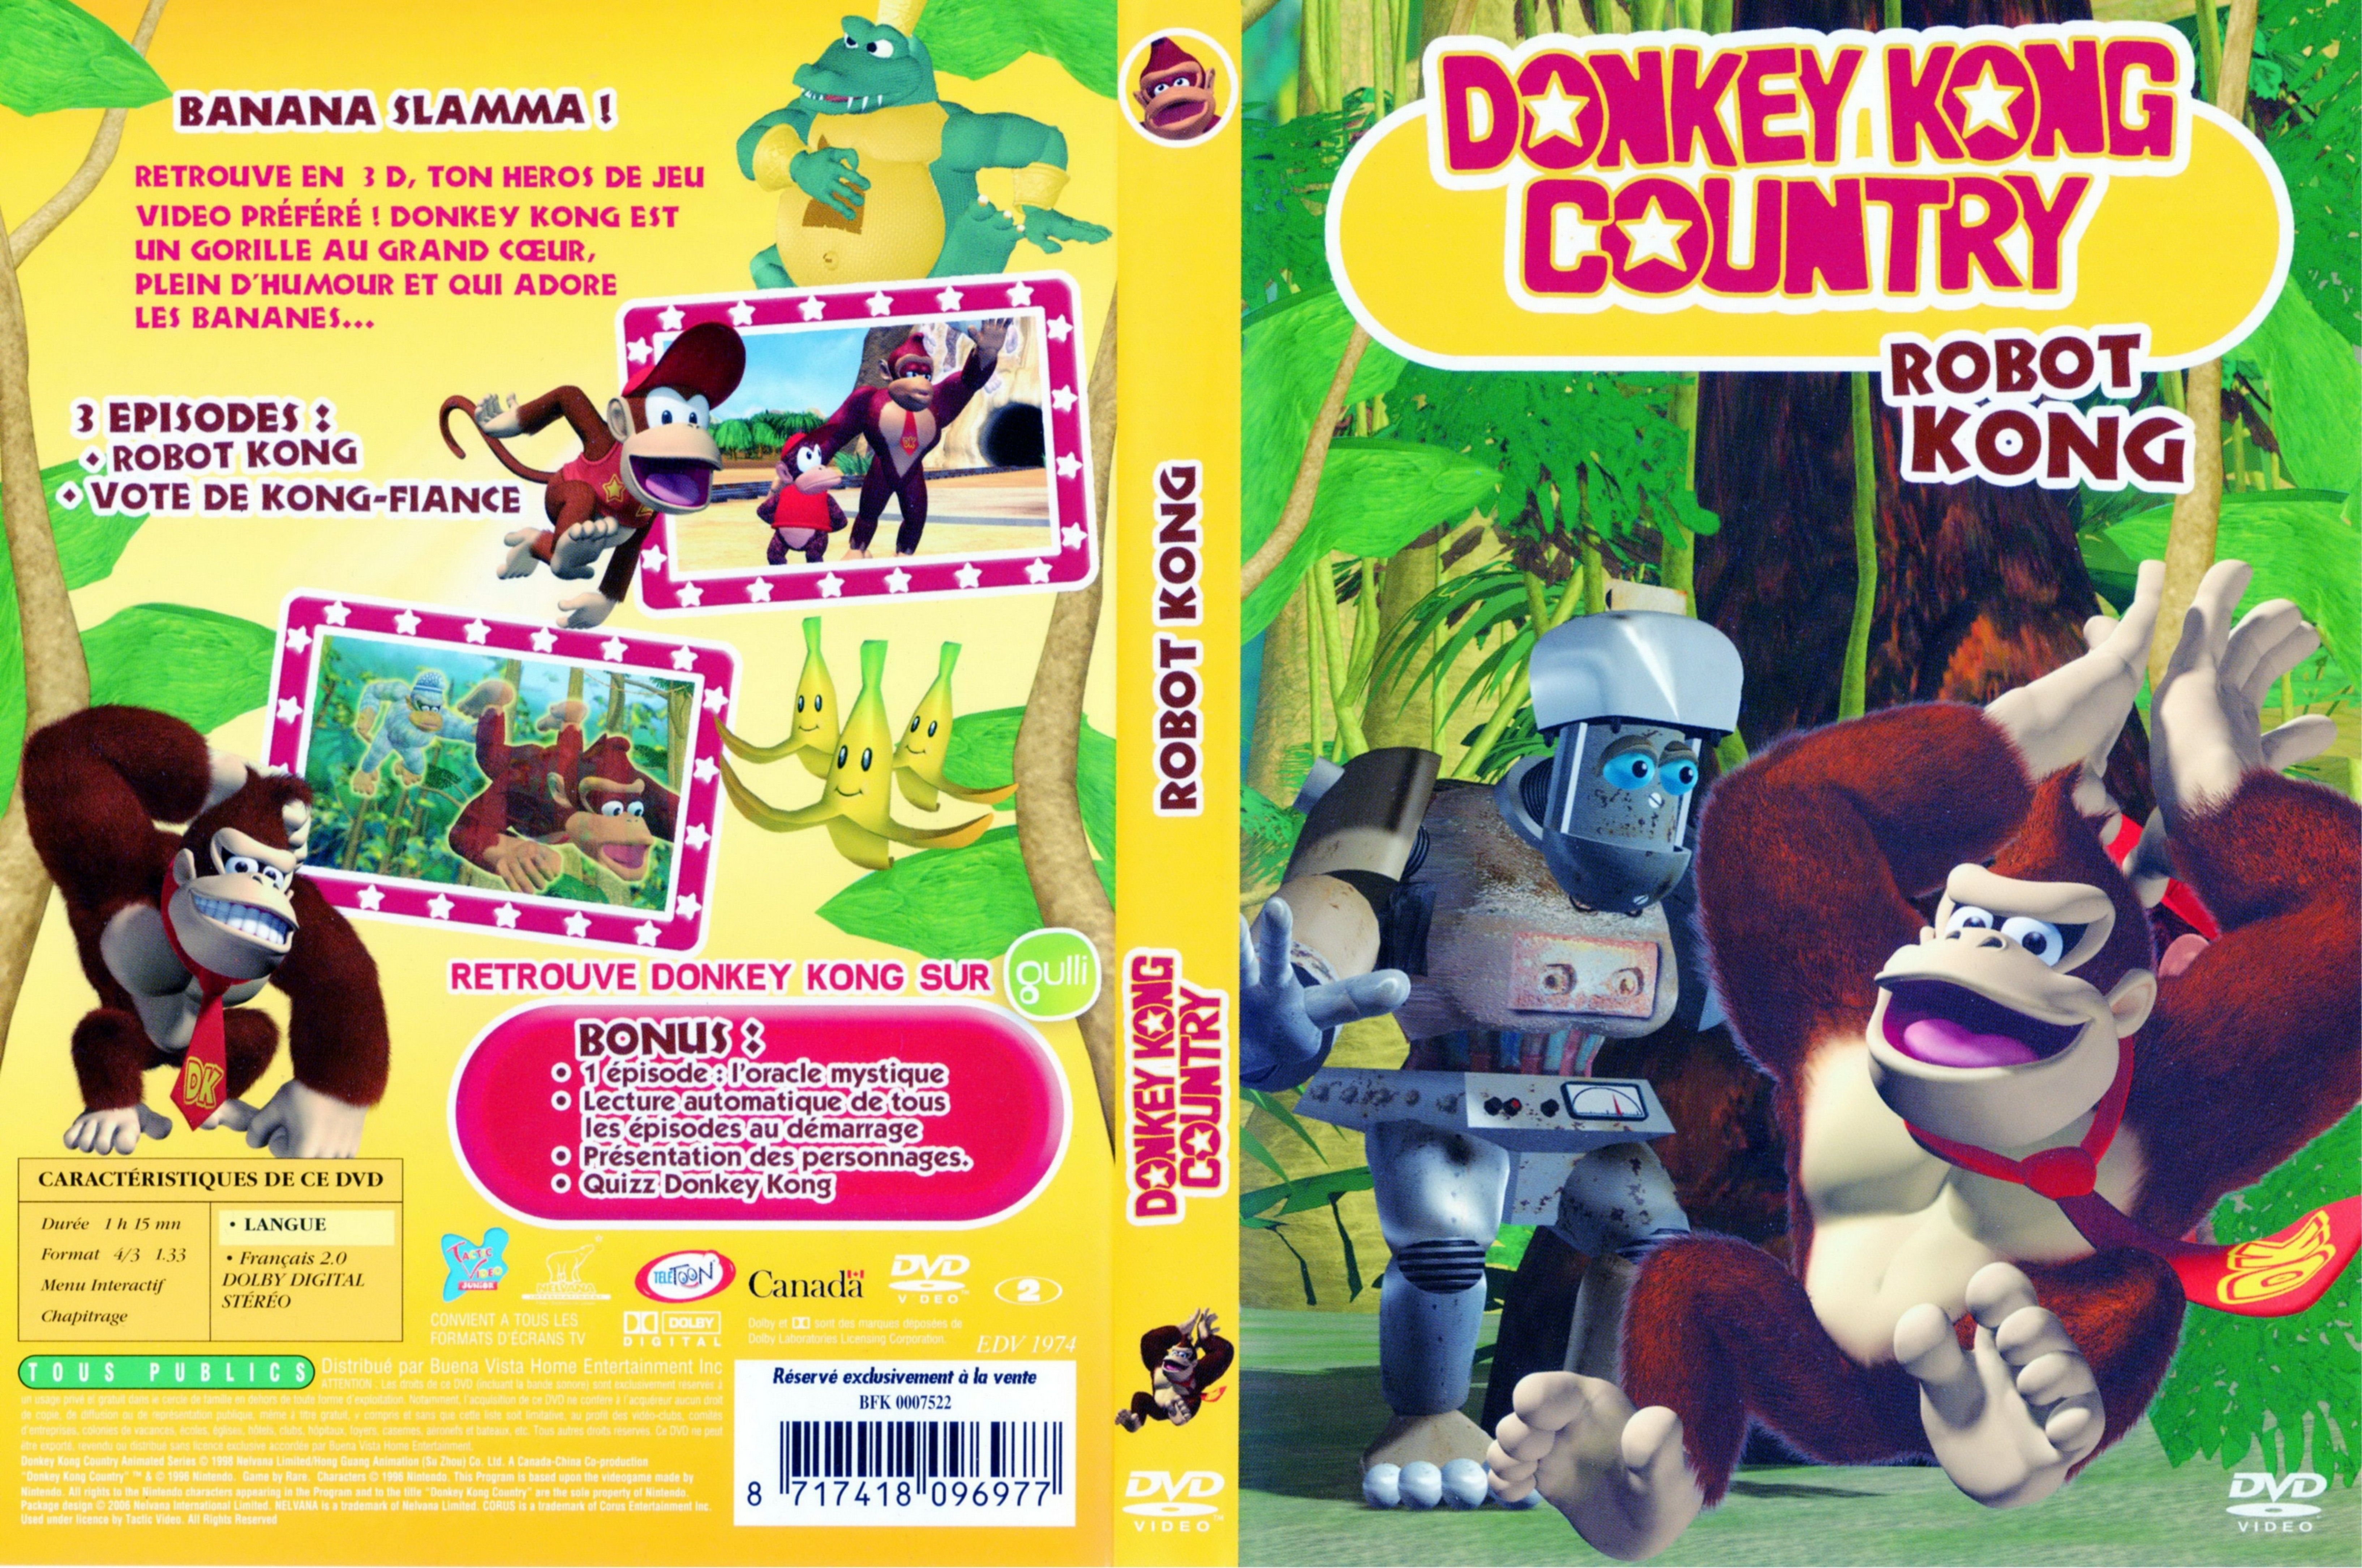 Jaquette DVD Donkey Kong country - Robot kong